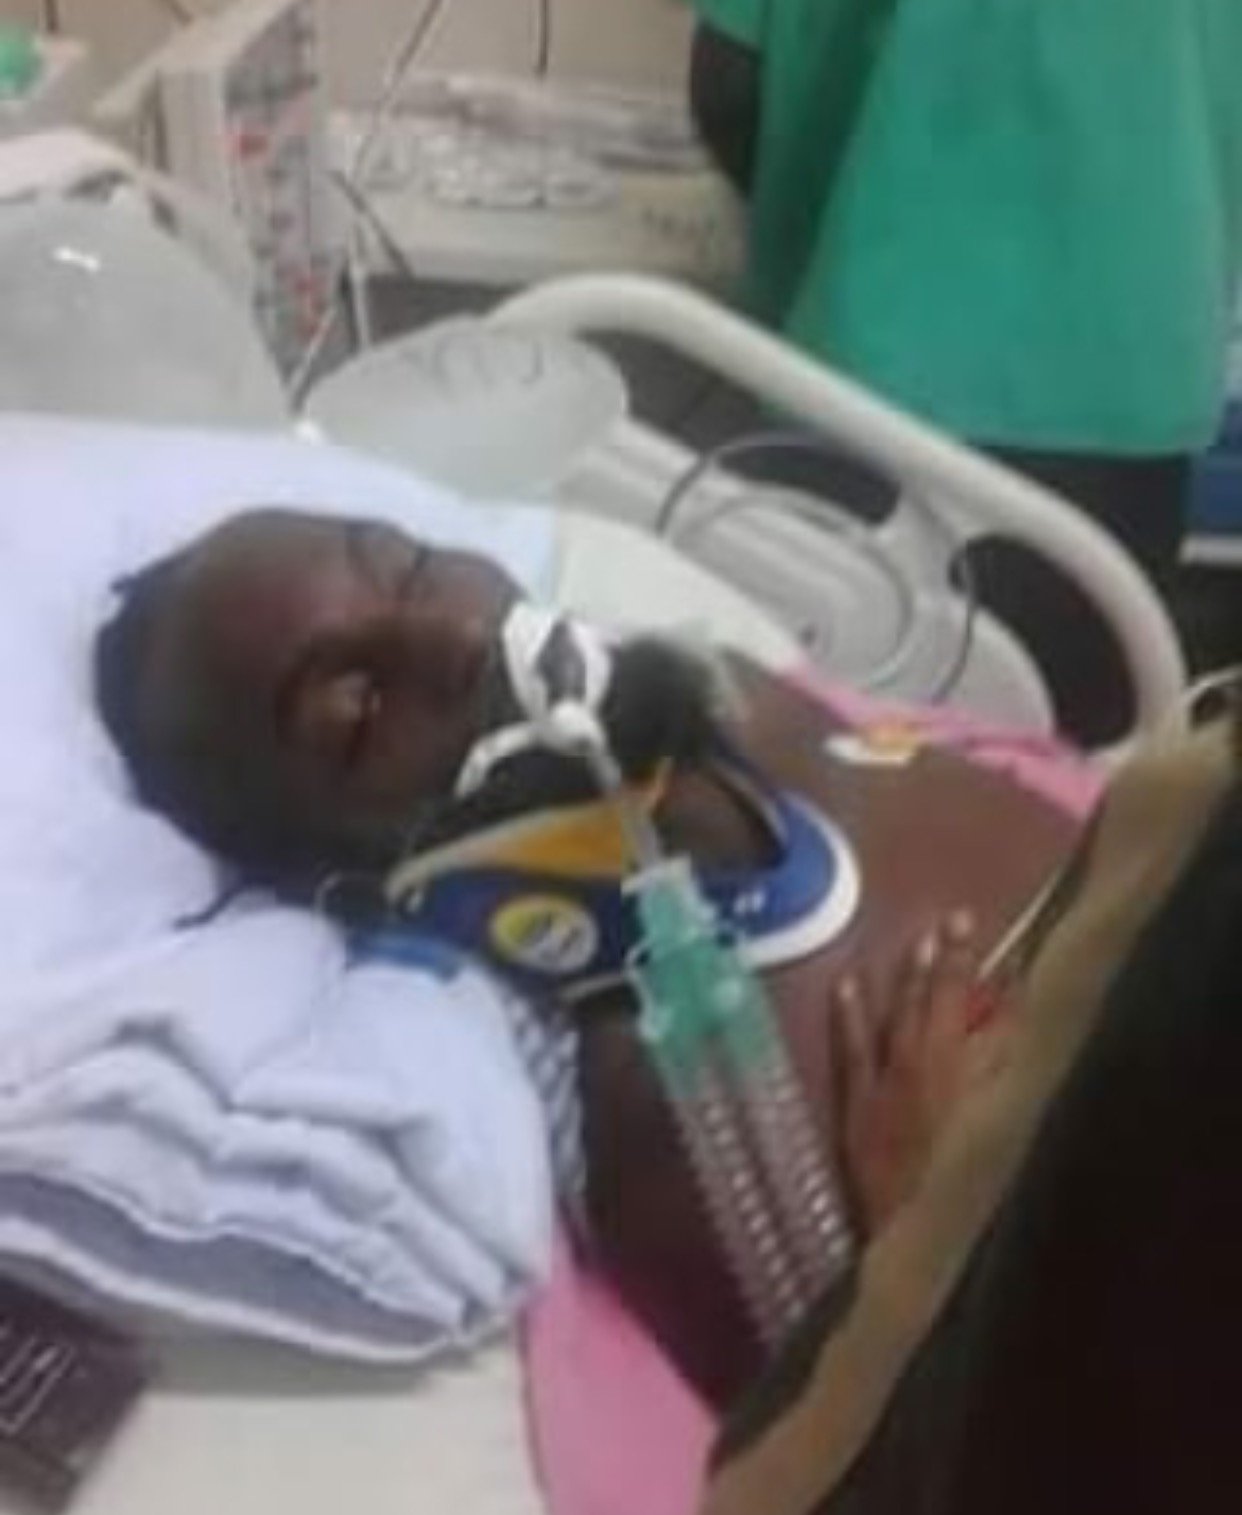 Popular artist from Radio and Weasel band admitted in hospital after road accident